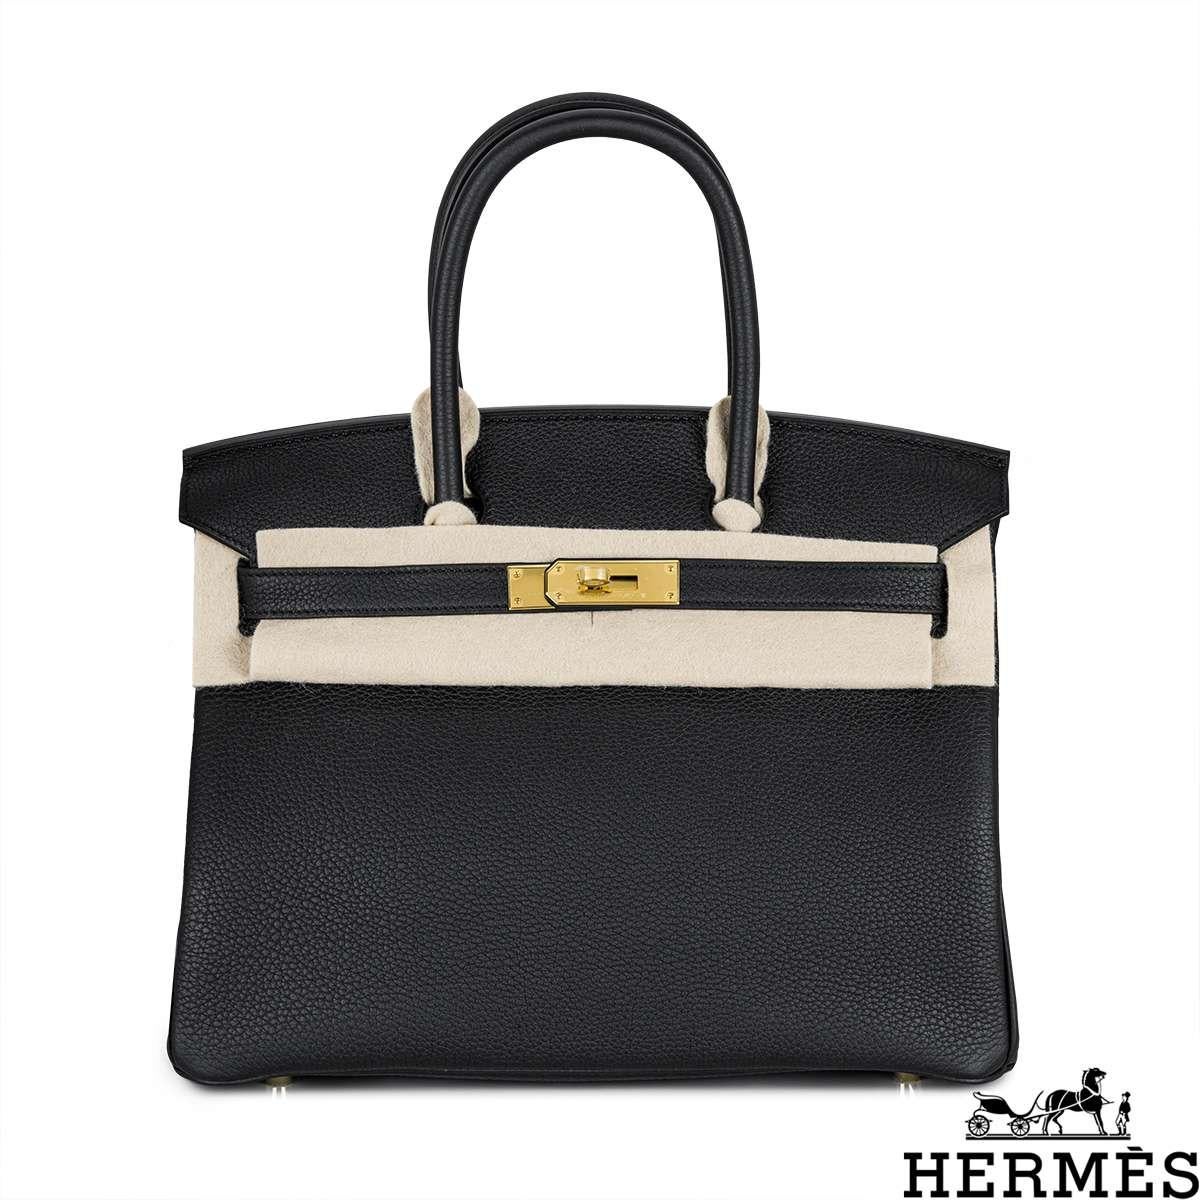 An amazing Hermès 30cm Birkin bag. The exterior of this Birkin is in Noir Veau Togo leather with tonal stitching. It features gold tone hardware with two straps and front toggle closure. The interior features a zip pocket with an Hermès engraved 